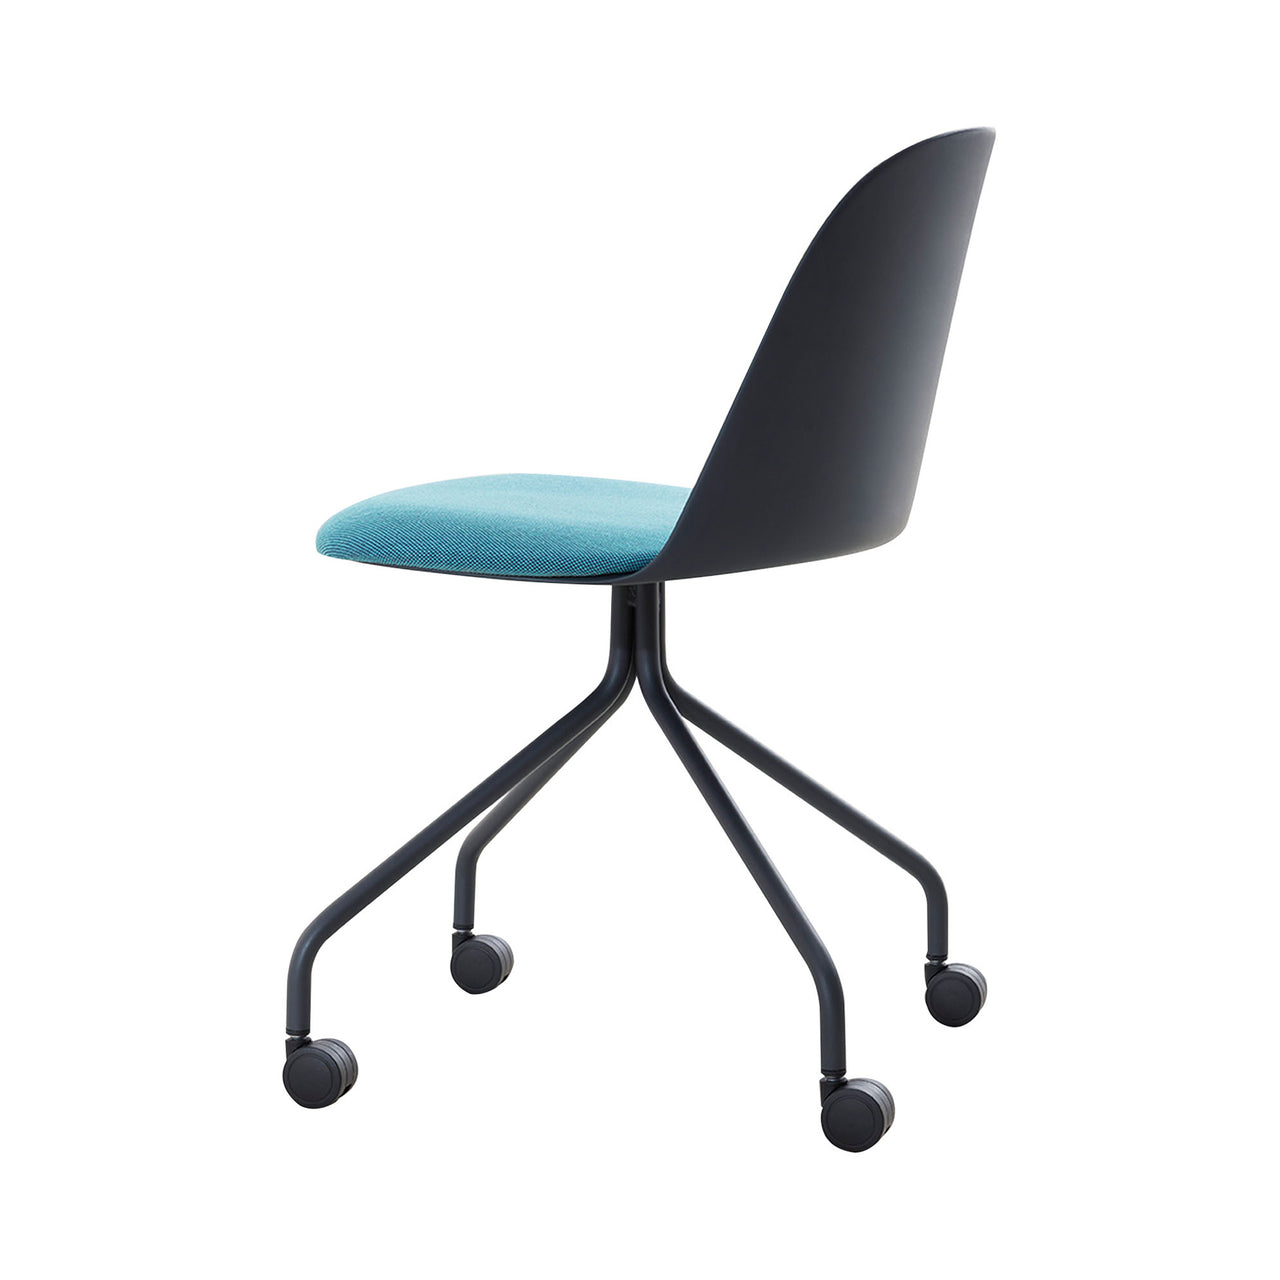 Mariolina Side Chair: Casters + Upholstery + Lacquered Anthracite + Anthracite